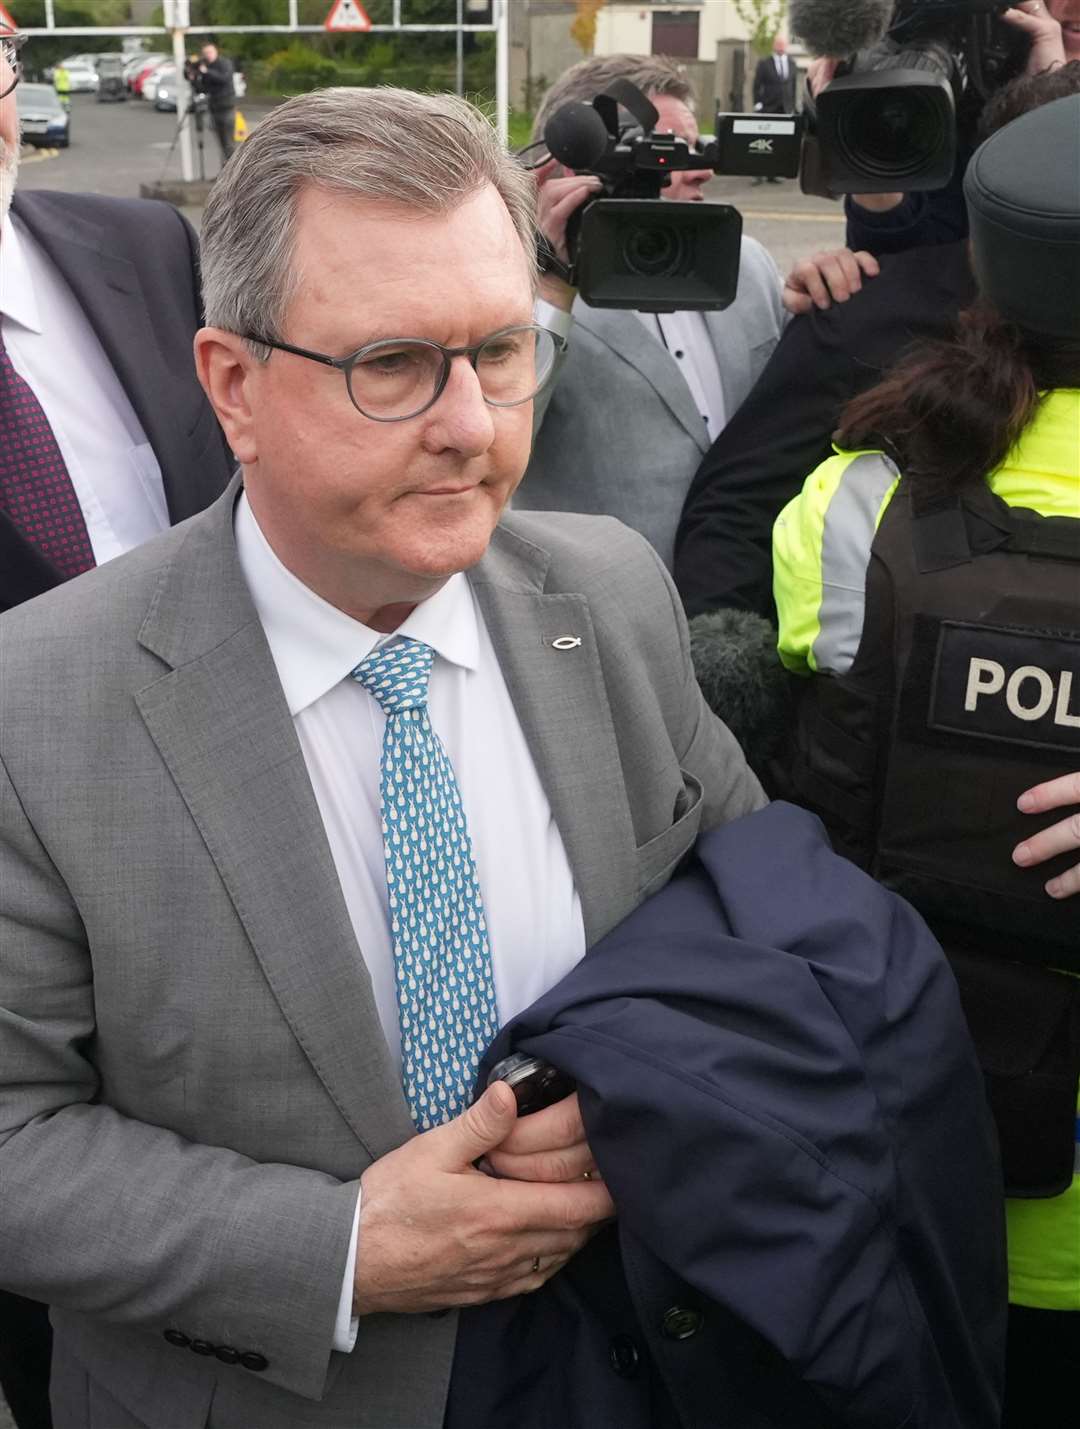 Former DUP leader Sir Jeffrey Donaldson faces 11 charges – one of rape, one of committing an act of gross indecency and nine of indecent assault (Niall Carson/PA)